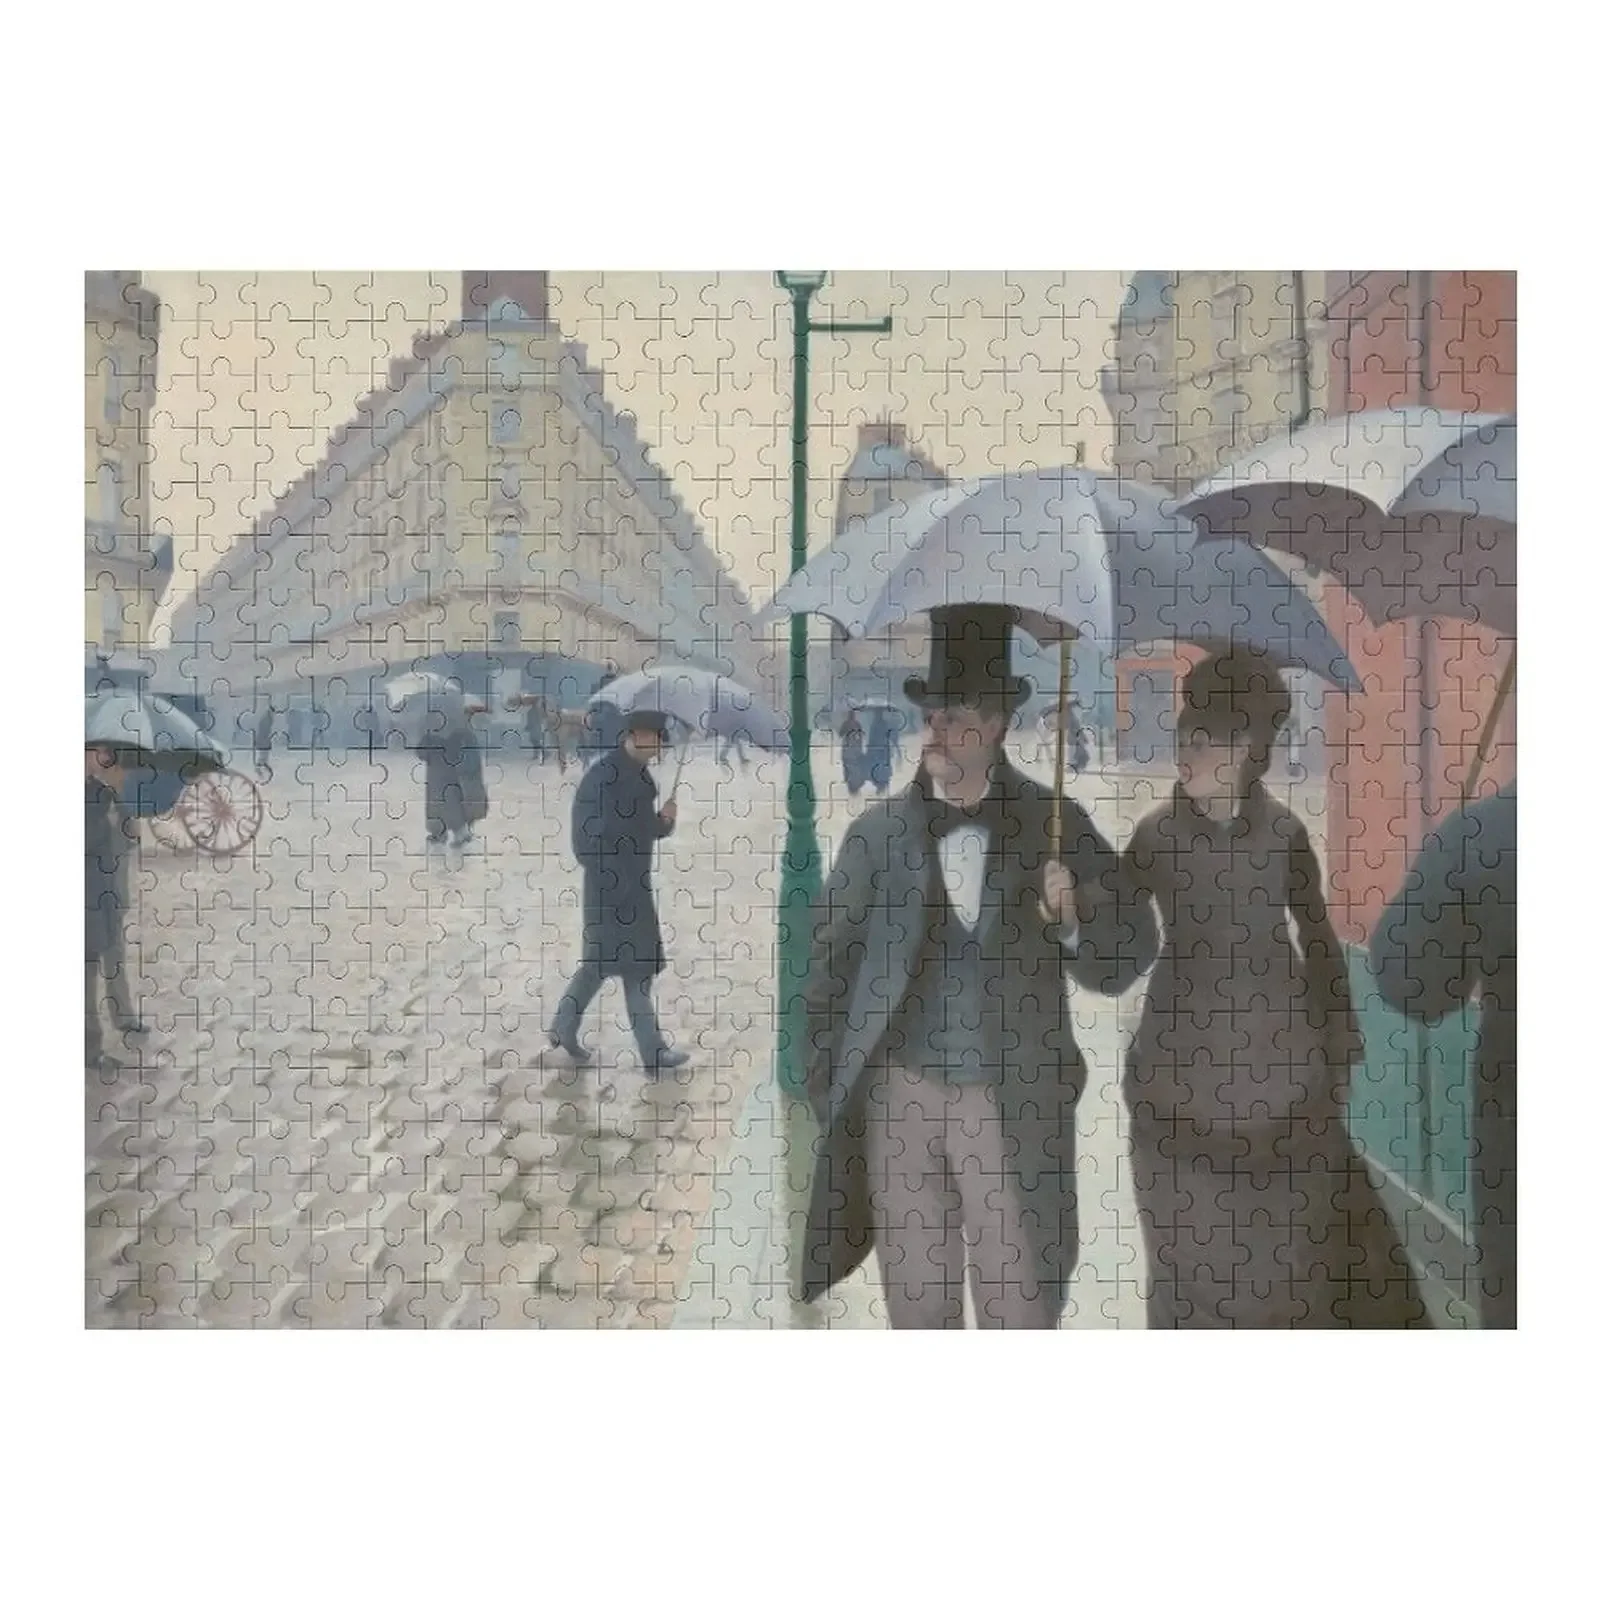 Fine Art: Gustave Caillebotte - Paris Street In Rainy Weather Jigsaw Puzzle For Children Scale Motors Jigsaw Custom Puzzle 1 18 scale 2002 flhrsei cvo custom screamin eagle road king diecast modeling motorcycle street cruiser bike toys replicas